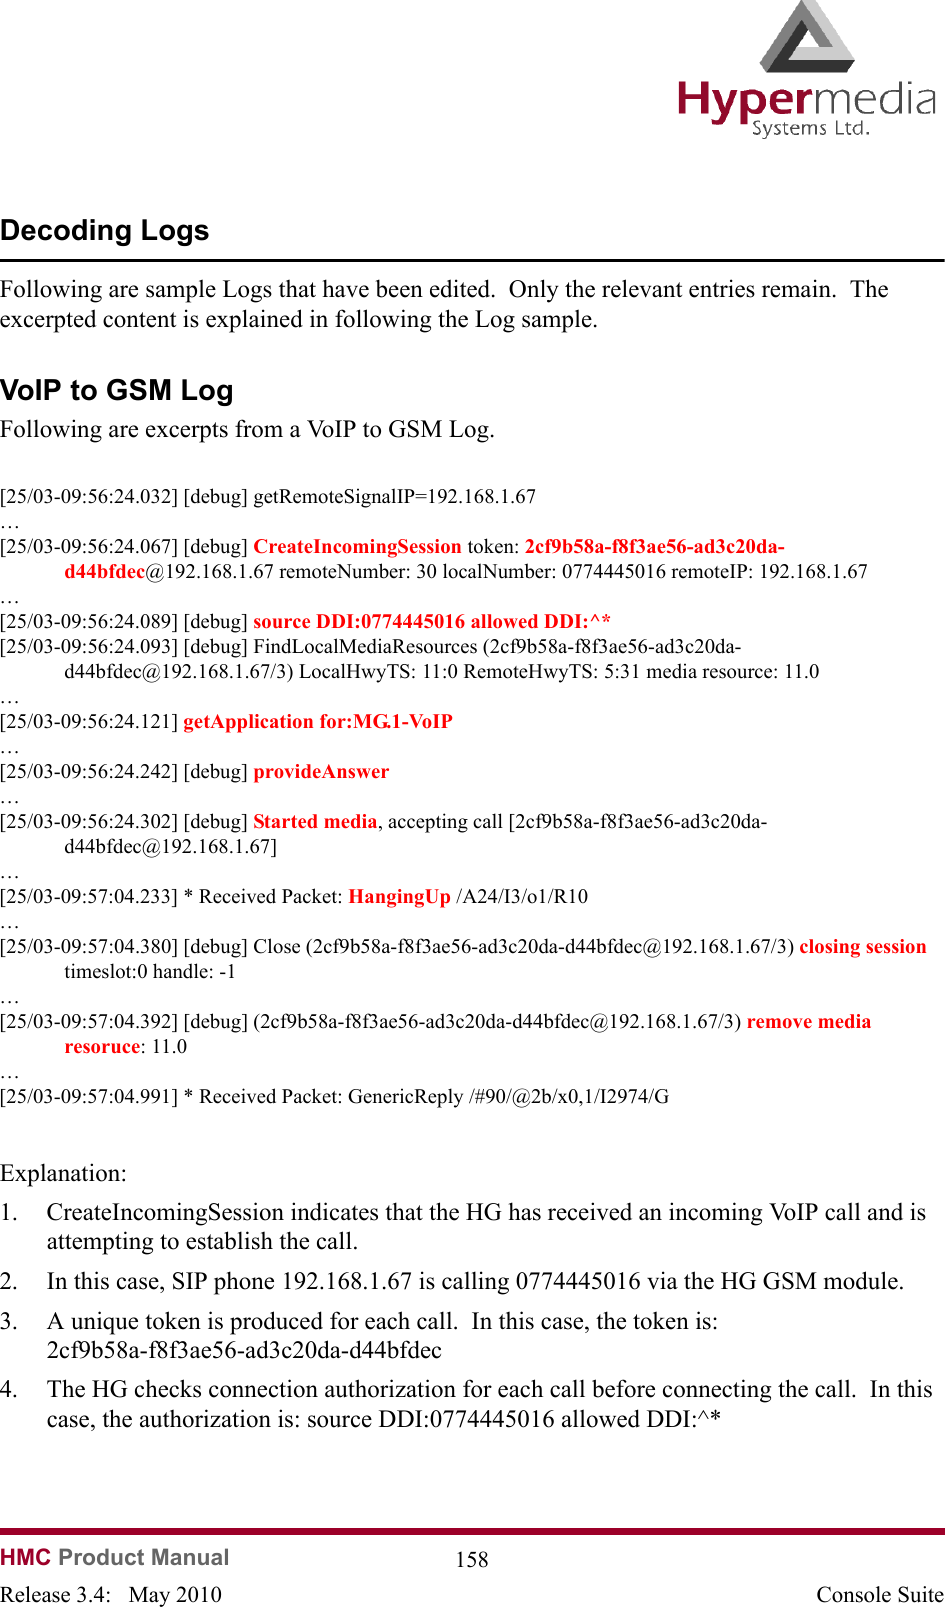   HMC Product Manual  158Release 3.4:   May 2010 Console SuiteDecoding LogsFollowing are sample Logs that have been edited.  Only the relevant entries remain.  The excerpted content is explained in following the Log sample. VoIP to GSM LogFollowing are excerpts from a VoIP to GSM Log.[25/03-09:56:24.032] [debug] getRemoteSignalIP=192.168.1.67…[25/03-09:56:24.067] [debug] CreateIncomingSession token: 2cf9b58a-f8f3ae56-ad3c20da-d44bfdec@192.168.1.67 remoteNumber: 30 localNumber: 0774445016 remoteIP: 192.168.1.67…[25/03-09:56:24.089] [debug] source DDI:0774445016 allowed DDI:^*  [25/03-09:56:24.093] [debug] FindLocalMediaResources (2cf9b58a-f8f3ae56-ad3c20da-d44bfdec@192.168.1.67/3) LocalHwyTS: 11:0 RemoteHwyTS: 5:31 media resource: 11.0…[25/03-09:56:24.121] getApplication for:MG.1-VoIP  …[25/03-09:56:24.242] [debug] provideAnswer  …[25/03-09:56:24.302] [debug] Started media, accepting call [2cf9b58a-f8f3ae56-ad3c20da-d44bfdec@192.168.1.67]…[25/03-09:57:04.233] * Received Packet: HangingUp /A24/I3/o1/R10…[25/03-09:57:04.380] [debug] Close (2cf9b58a-f8f3ae56-ad3c20da-d44bfdec@192.168.1.67/3) closing session timeslot:0 handle: -1…[25/03-09:57:04.392] [debug] (2cf9b58a-f8f3ae56-ad3c20da-d44bfdec@192.168.1.67/3) remove media resoruce: 11.0…[25/03-09:57:04.991] * Received Packet: GenericReply /#90/@2b/x0,1/I2974/GExplanation:1. CreateIncomingSession indicates that the HG has received an incoming VoIP call and is attempting to establish the call.2. In this case, SIP phone 192.168.1.67 is calling 0774445016 via the HG GSM module. 3. A unique token is produced for each call.  In this case, the token is: 2cf9b58a-f8f3ae56-ad3c20da-d44bfdec4. The HG checks connection authorization for each call before connecting the call.  In this case, the authorization is: source DDI:0774445016 allowed DDI:^*  